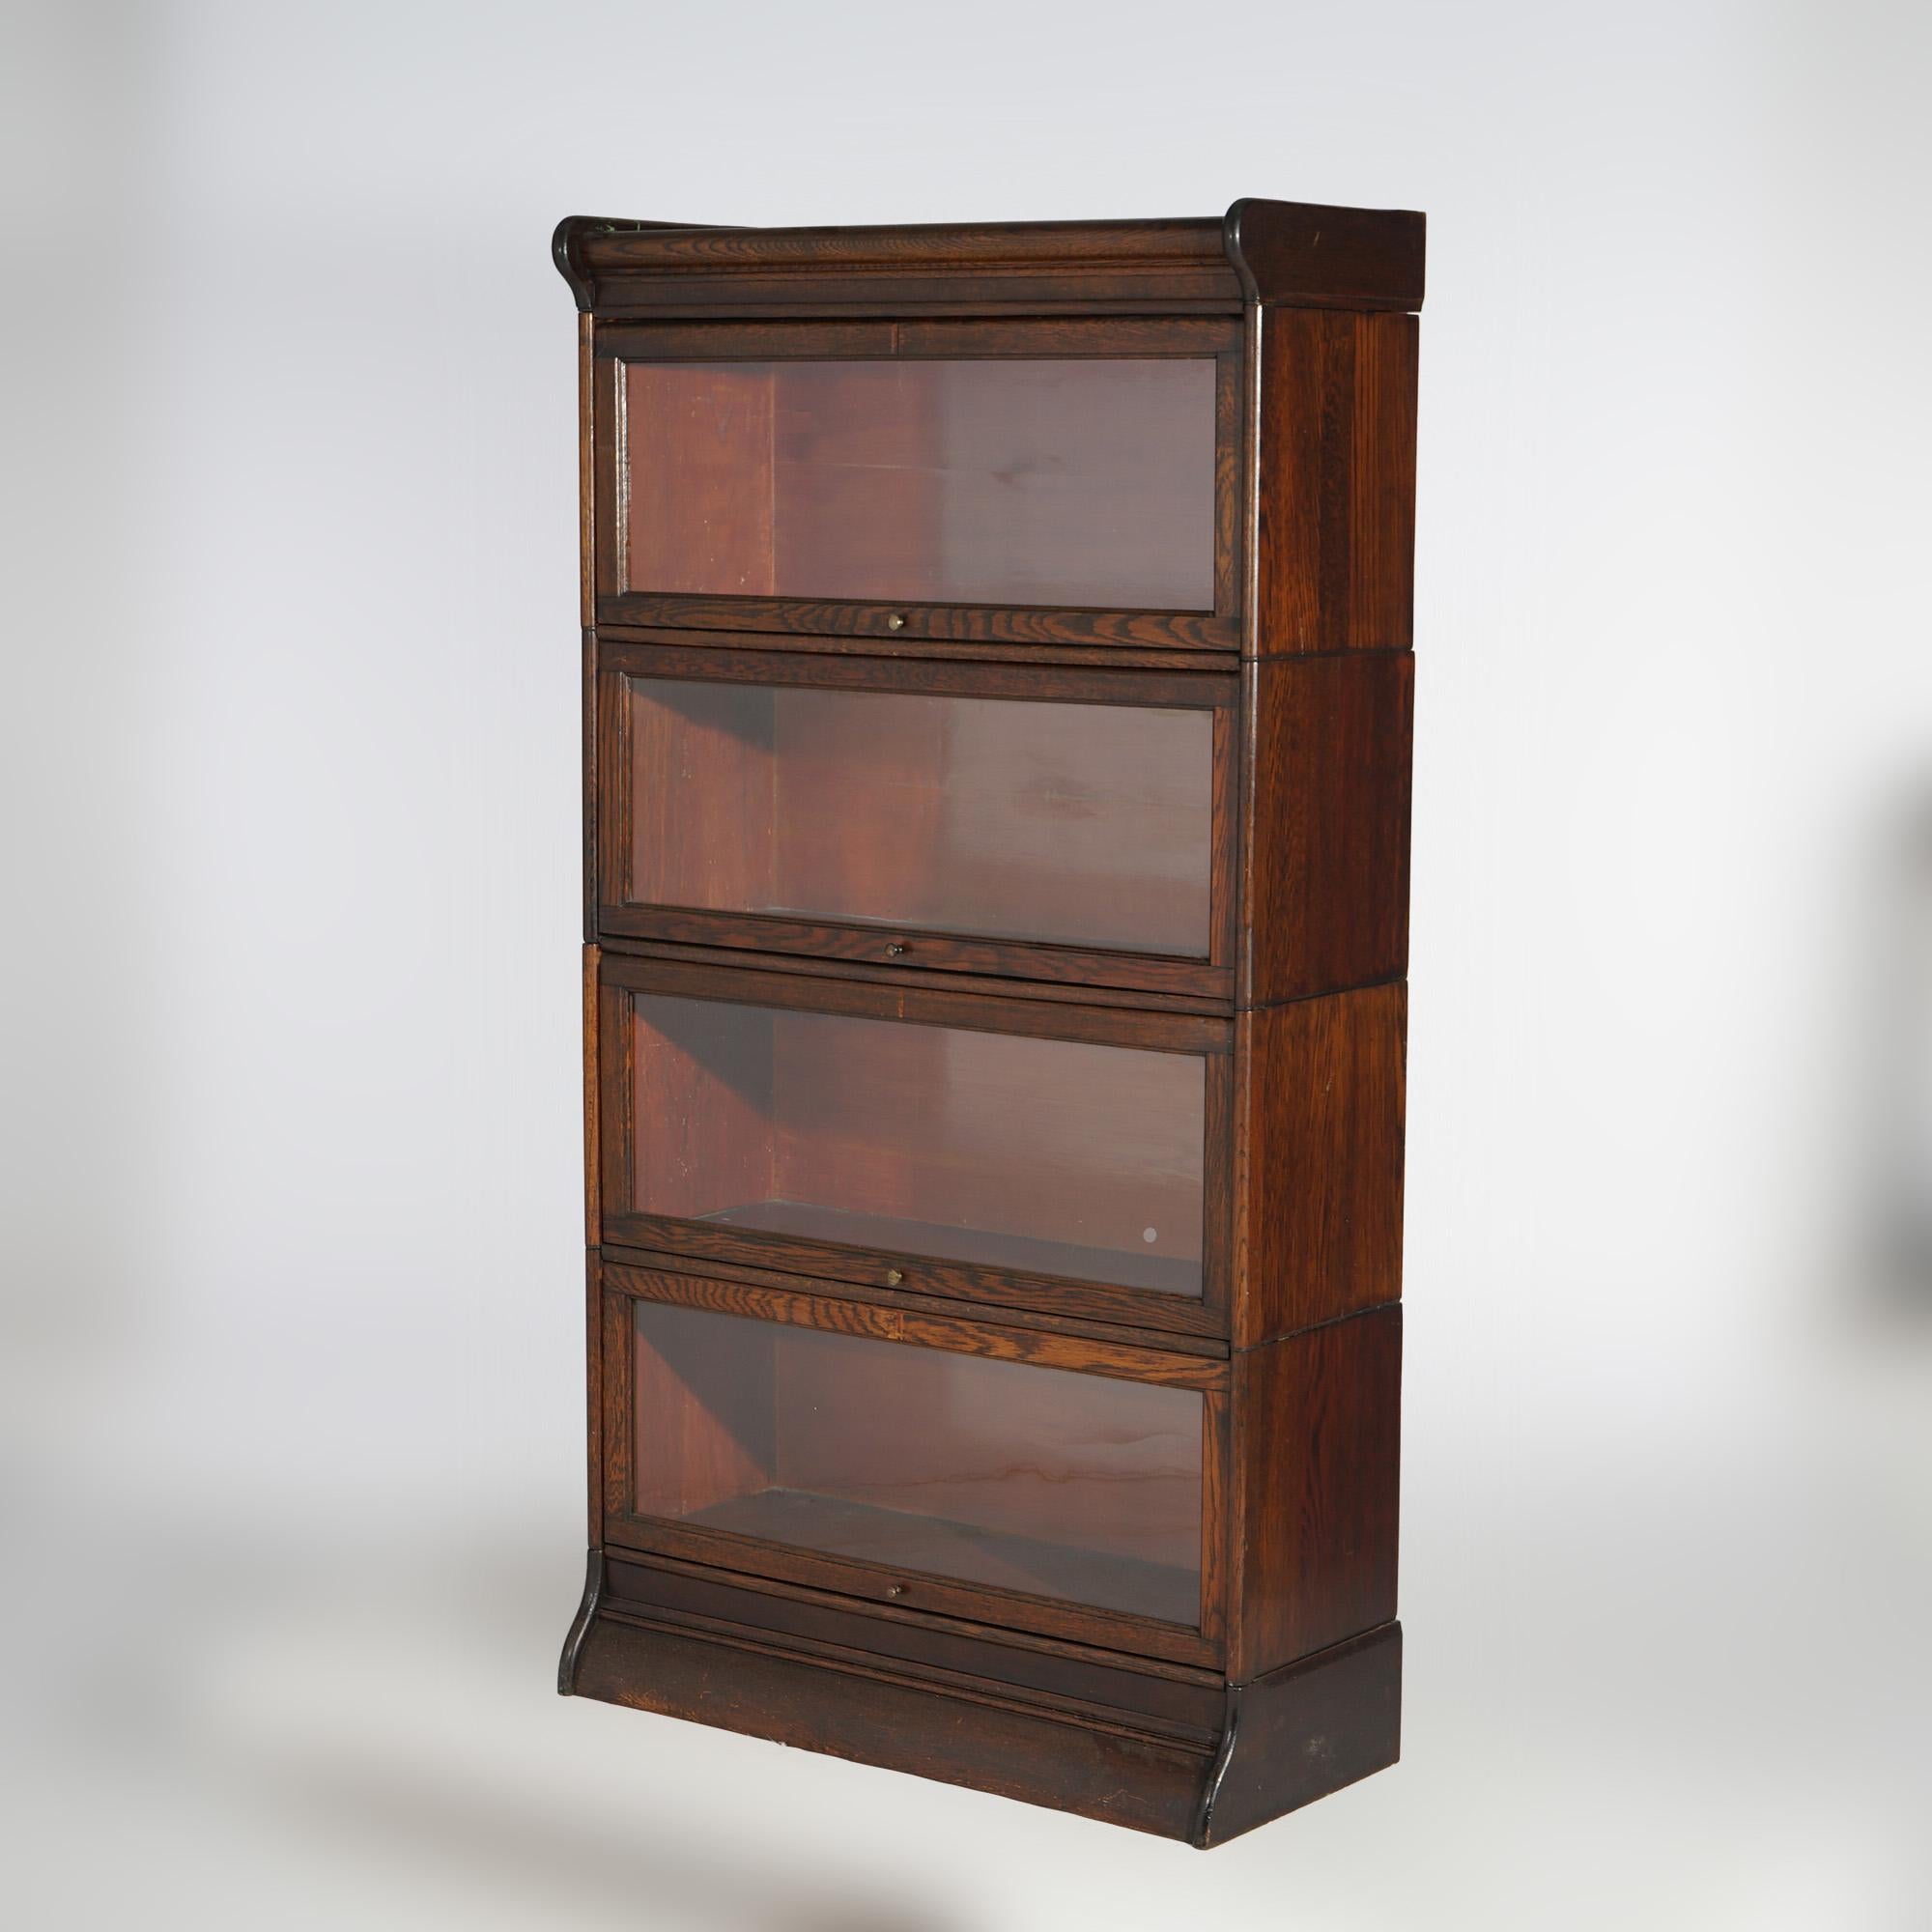 An antique Arts and Crafts Mission barrister bookcase offers oak construction with four stacks each having pull out glass doors and raised on ogee base, c1910

Measures - 63